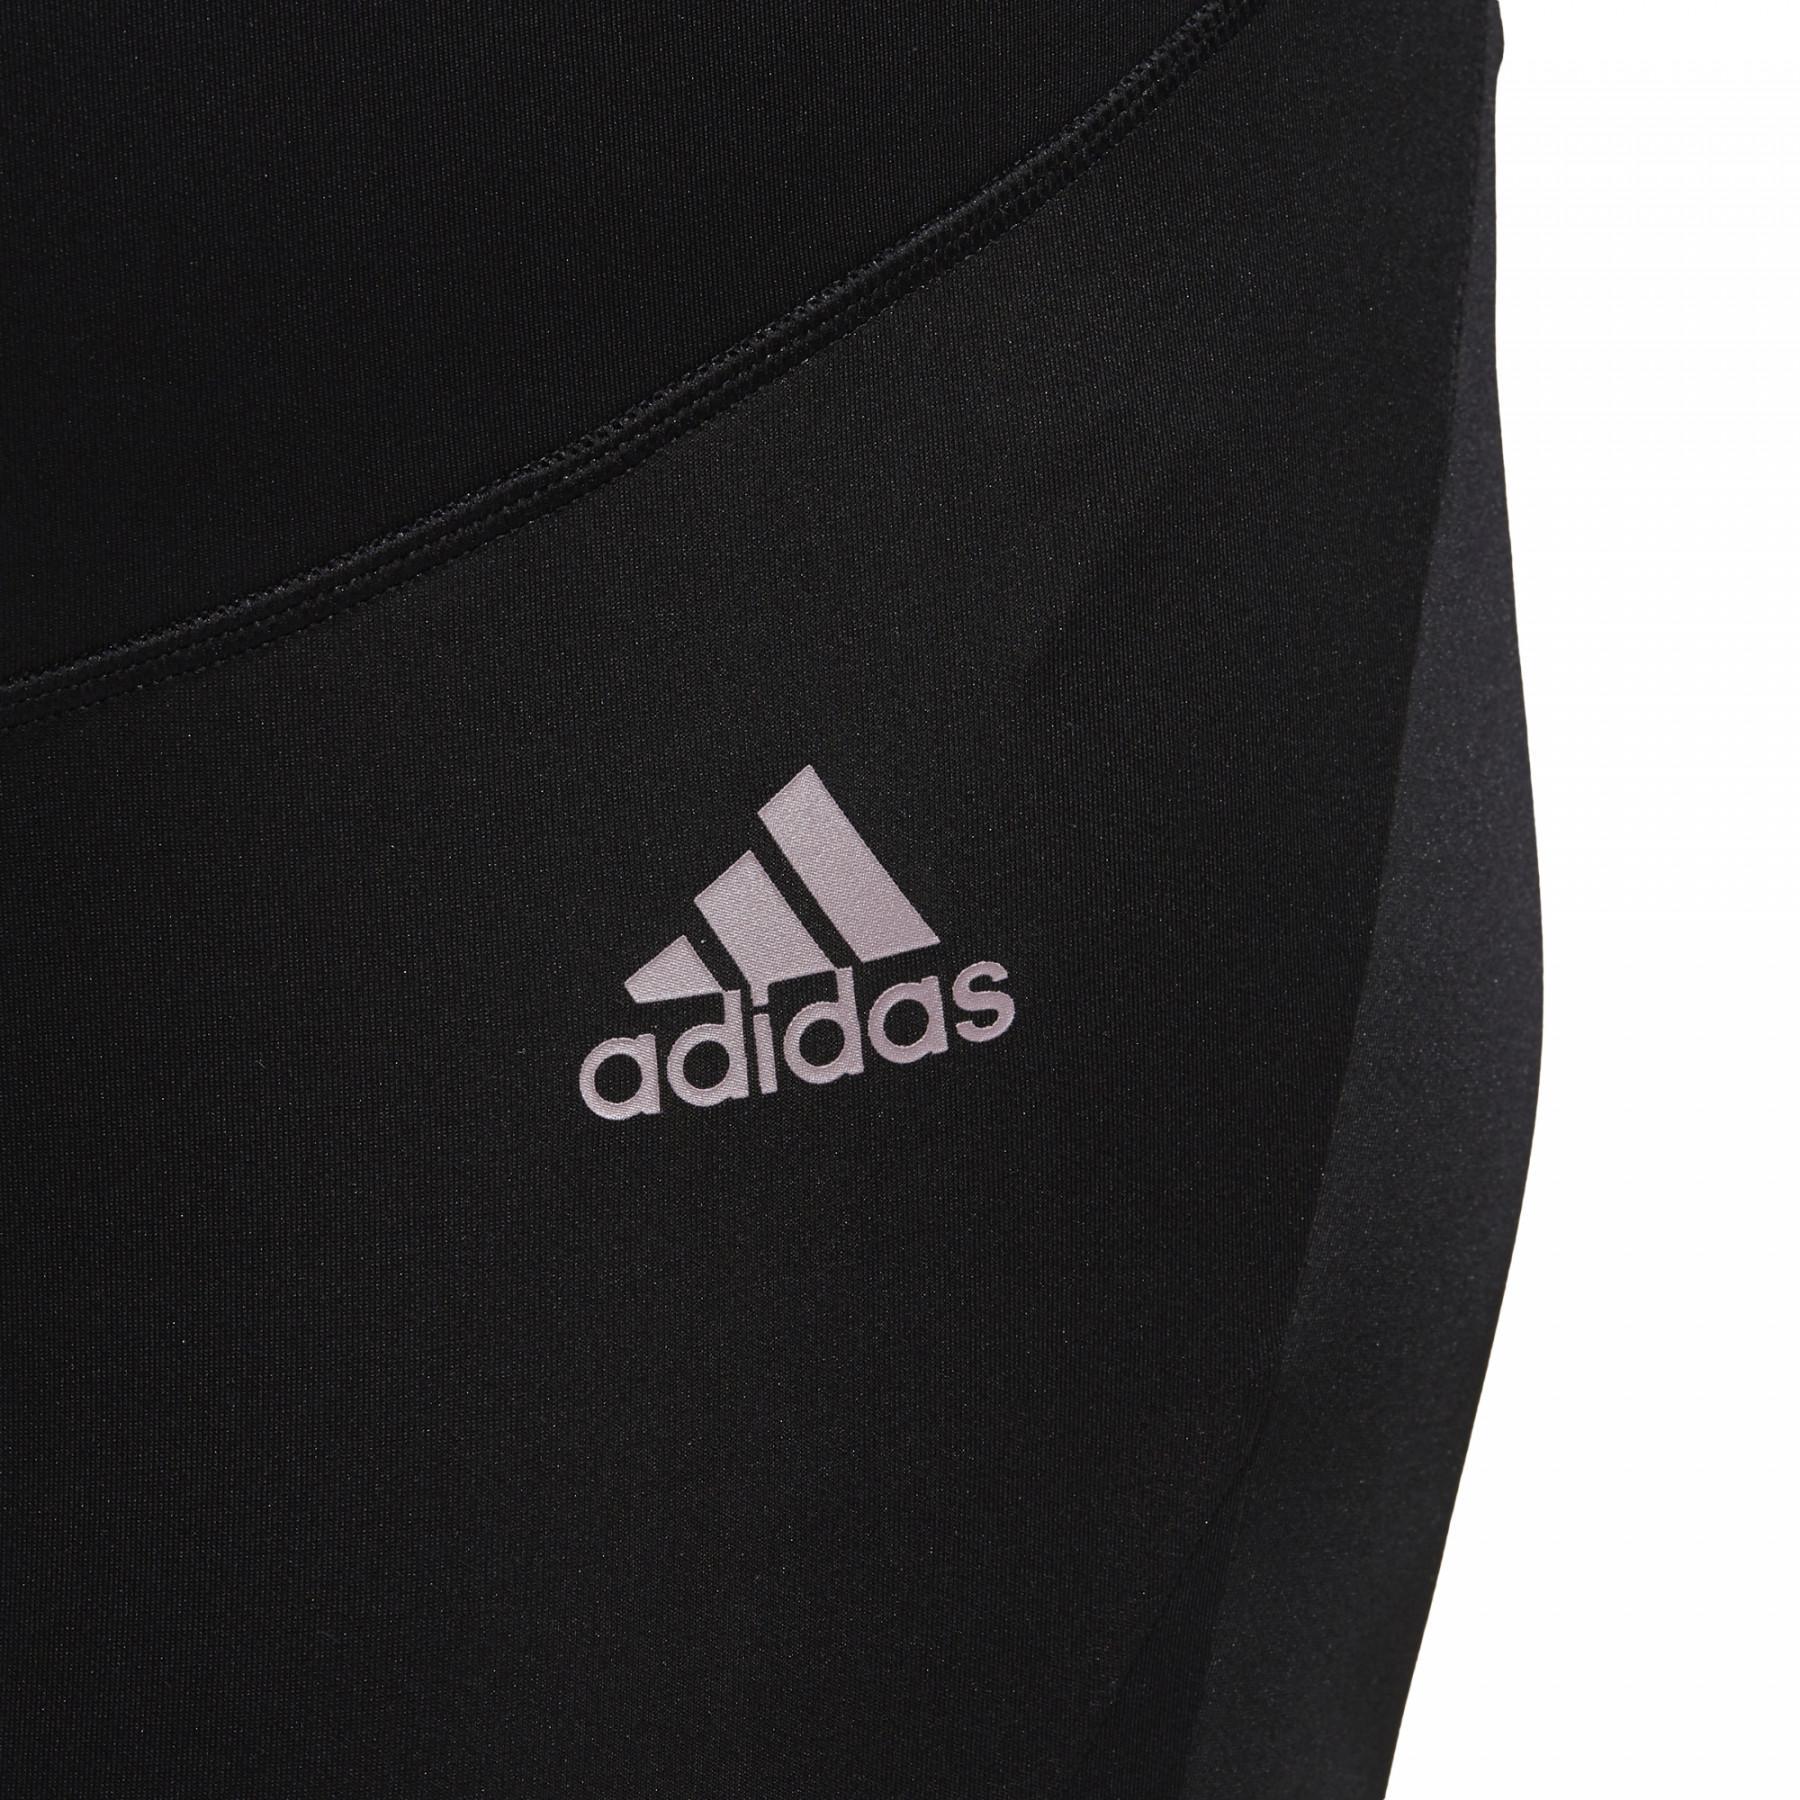 Leggings de mujer adidas Glam-On – grandes tailles